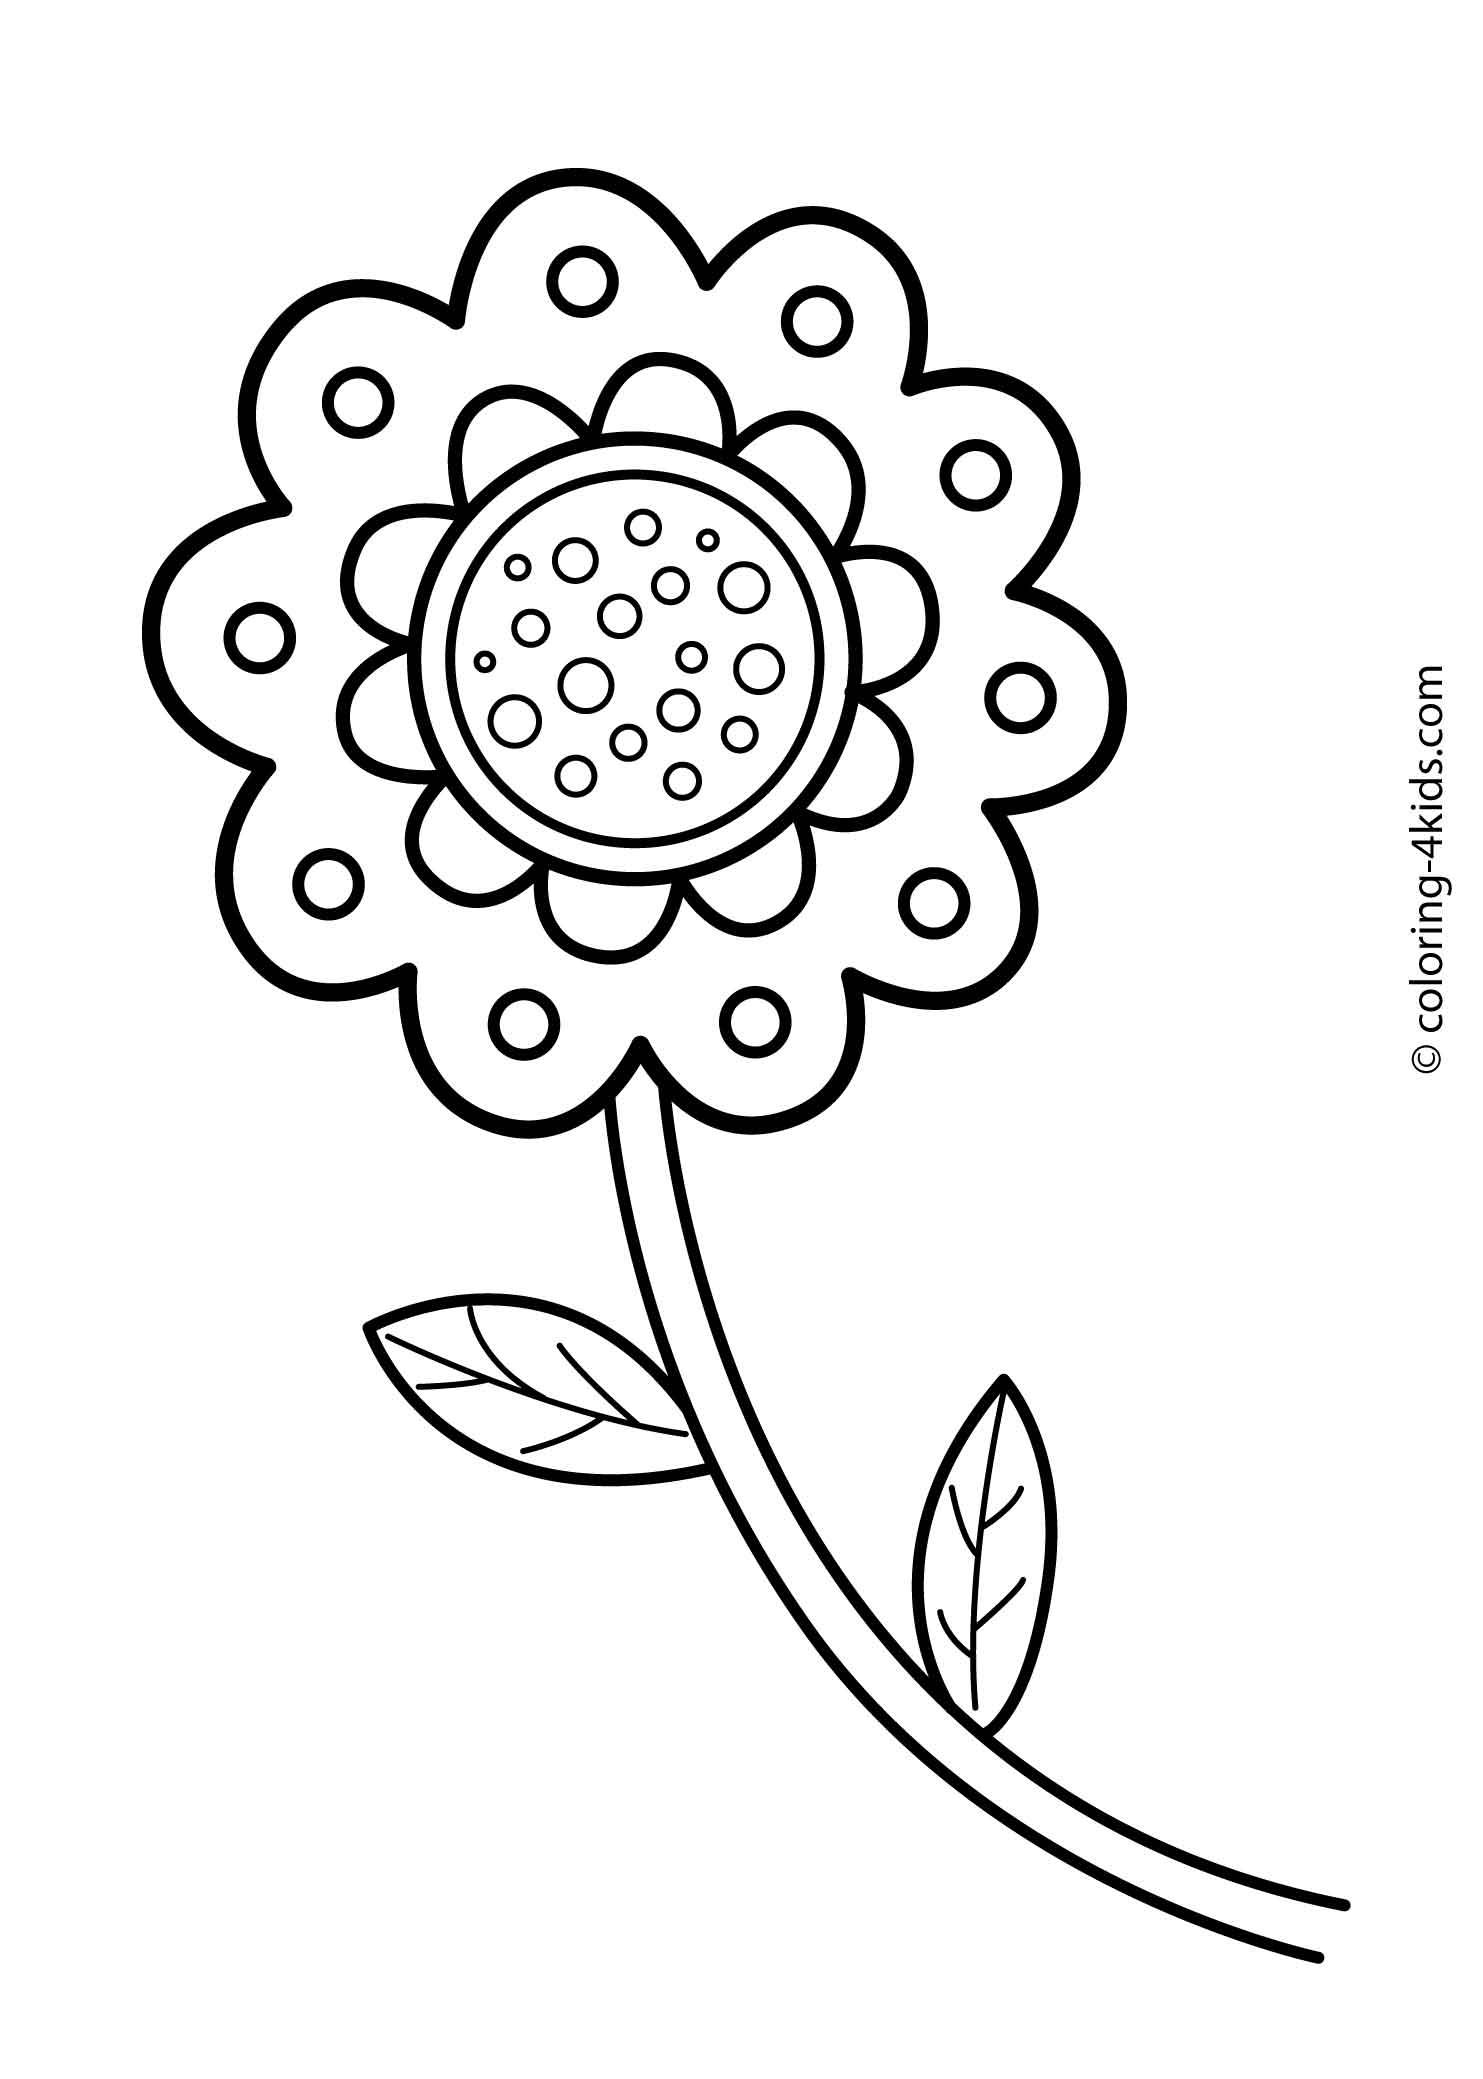 Beautiful Flower coloring pages for kids, printable | coloing ...